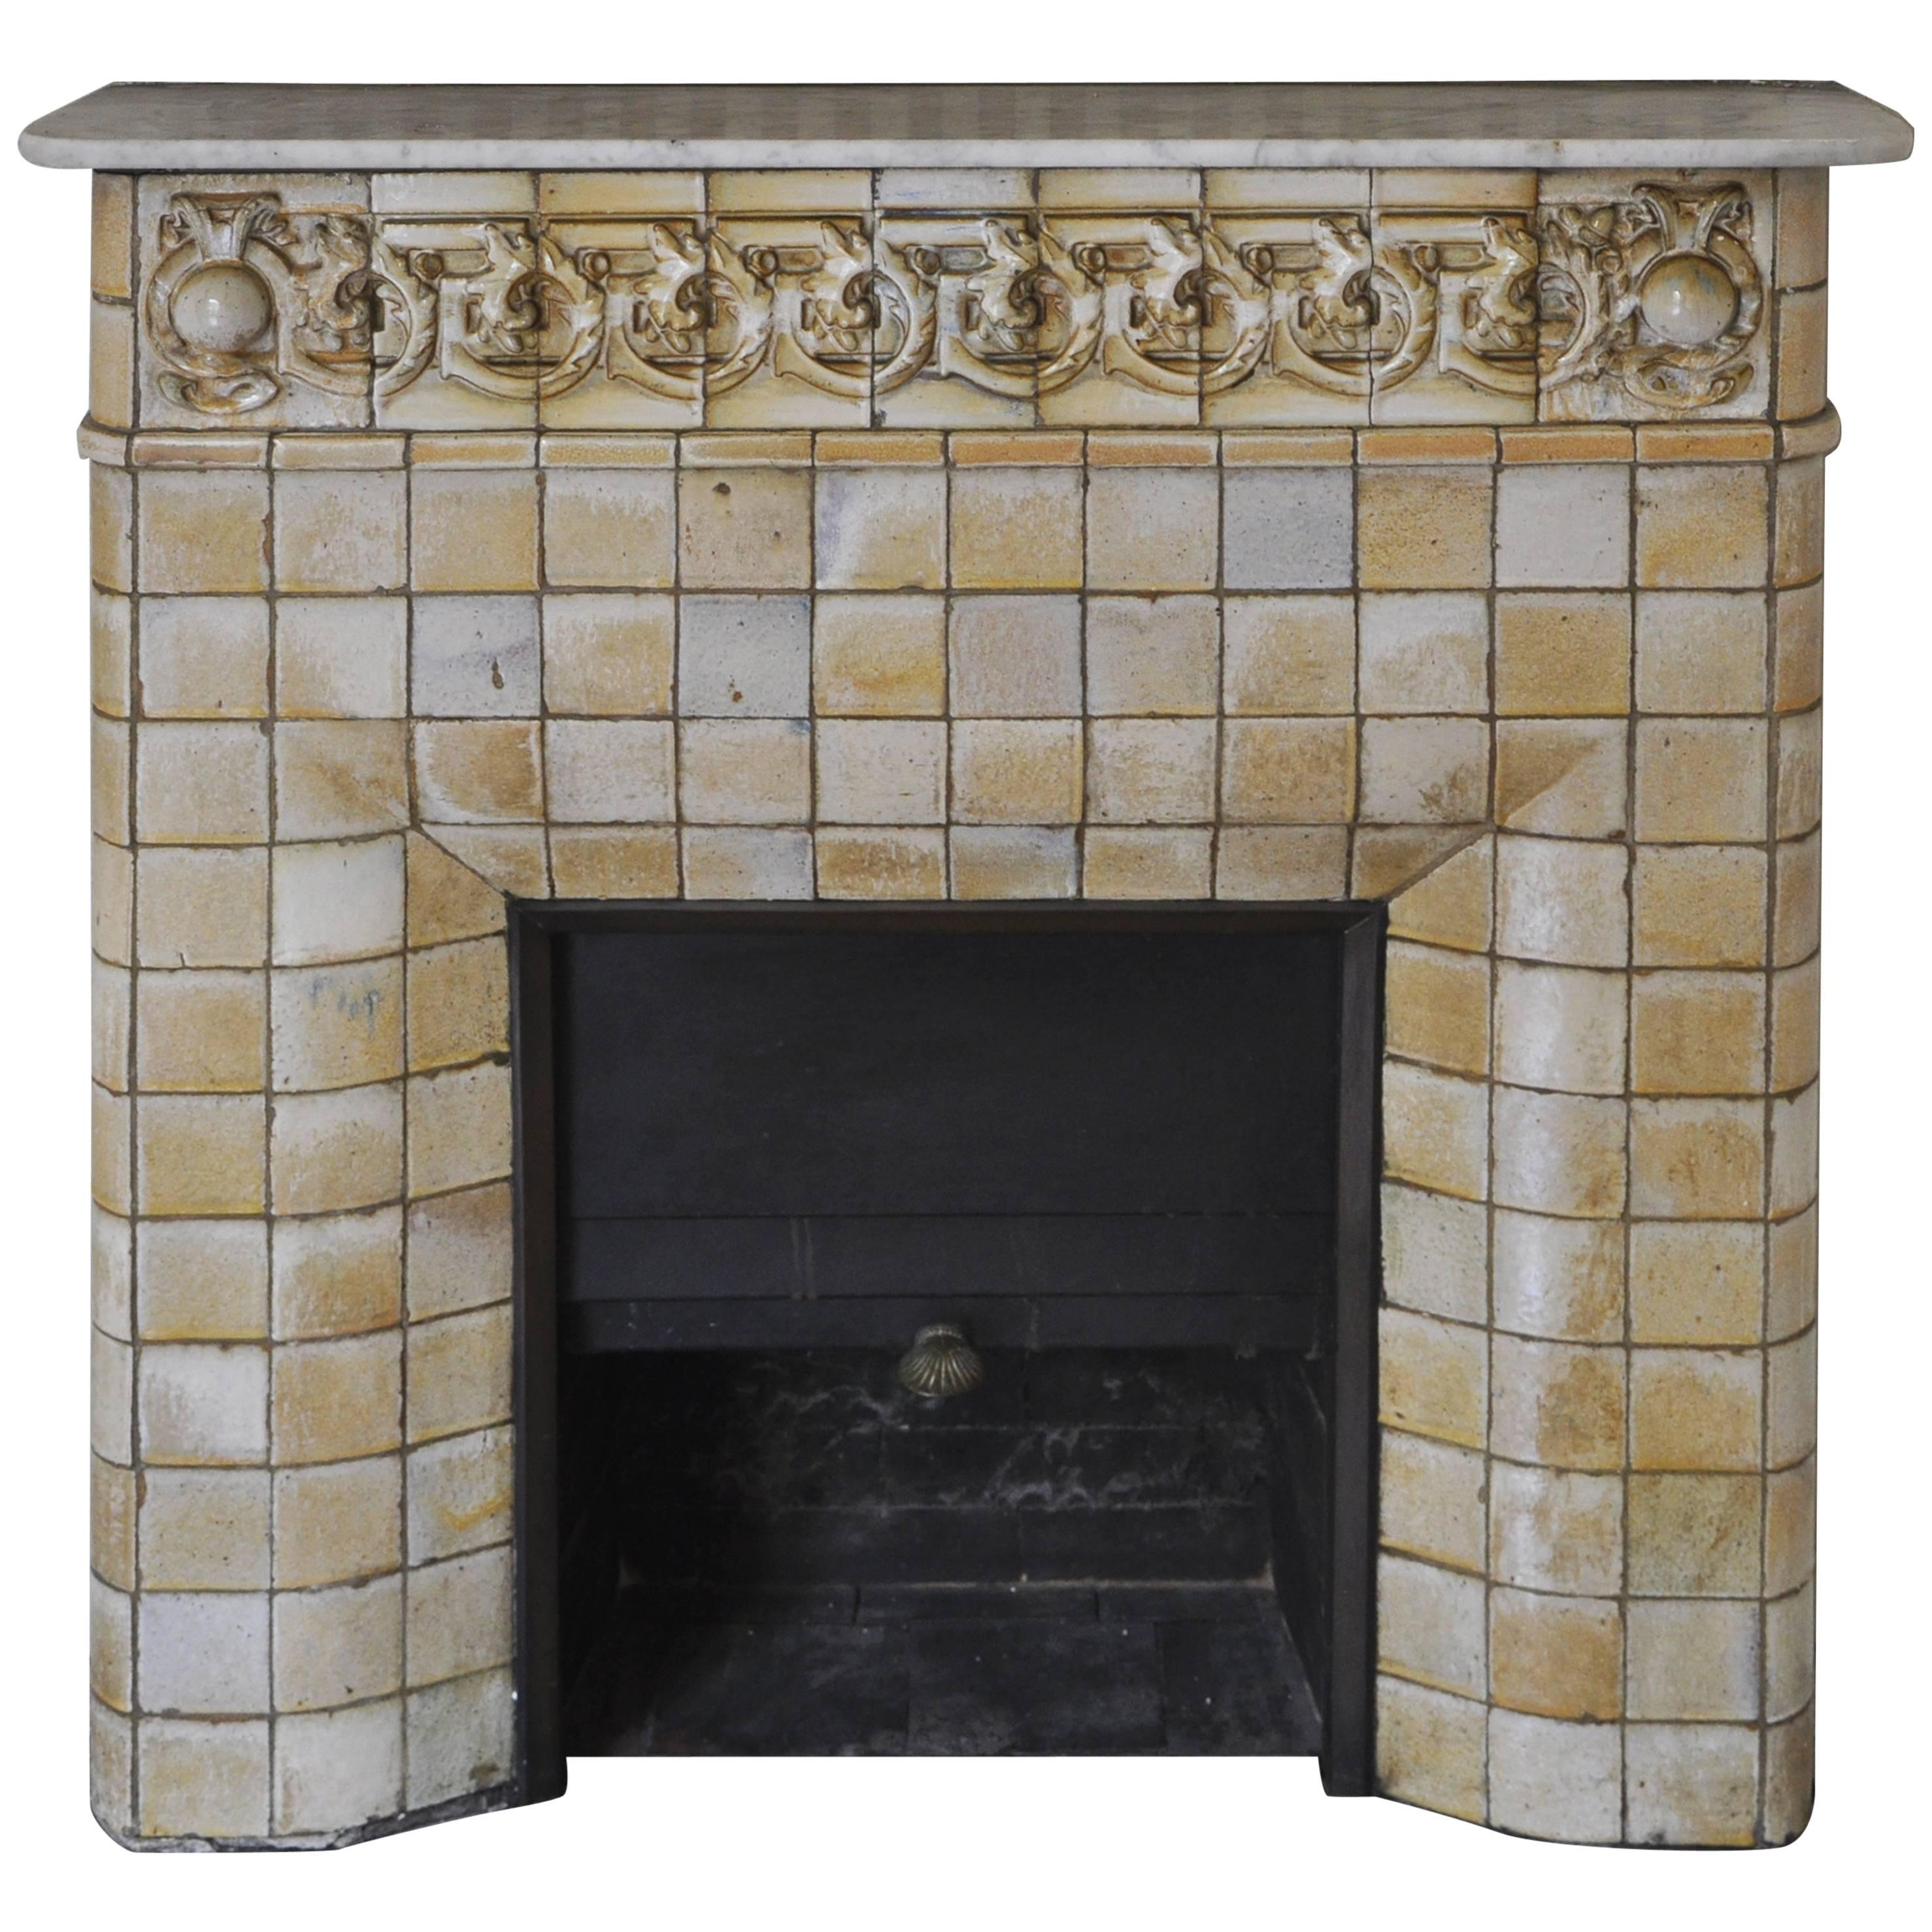 1900s Art Nouveau Fireplace Attributed to Gentil and Bourdet Manufacture For Sale